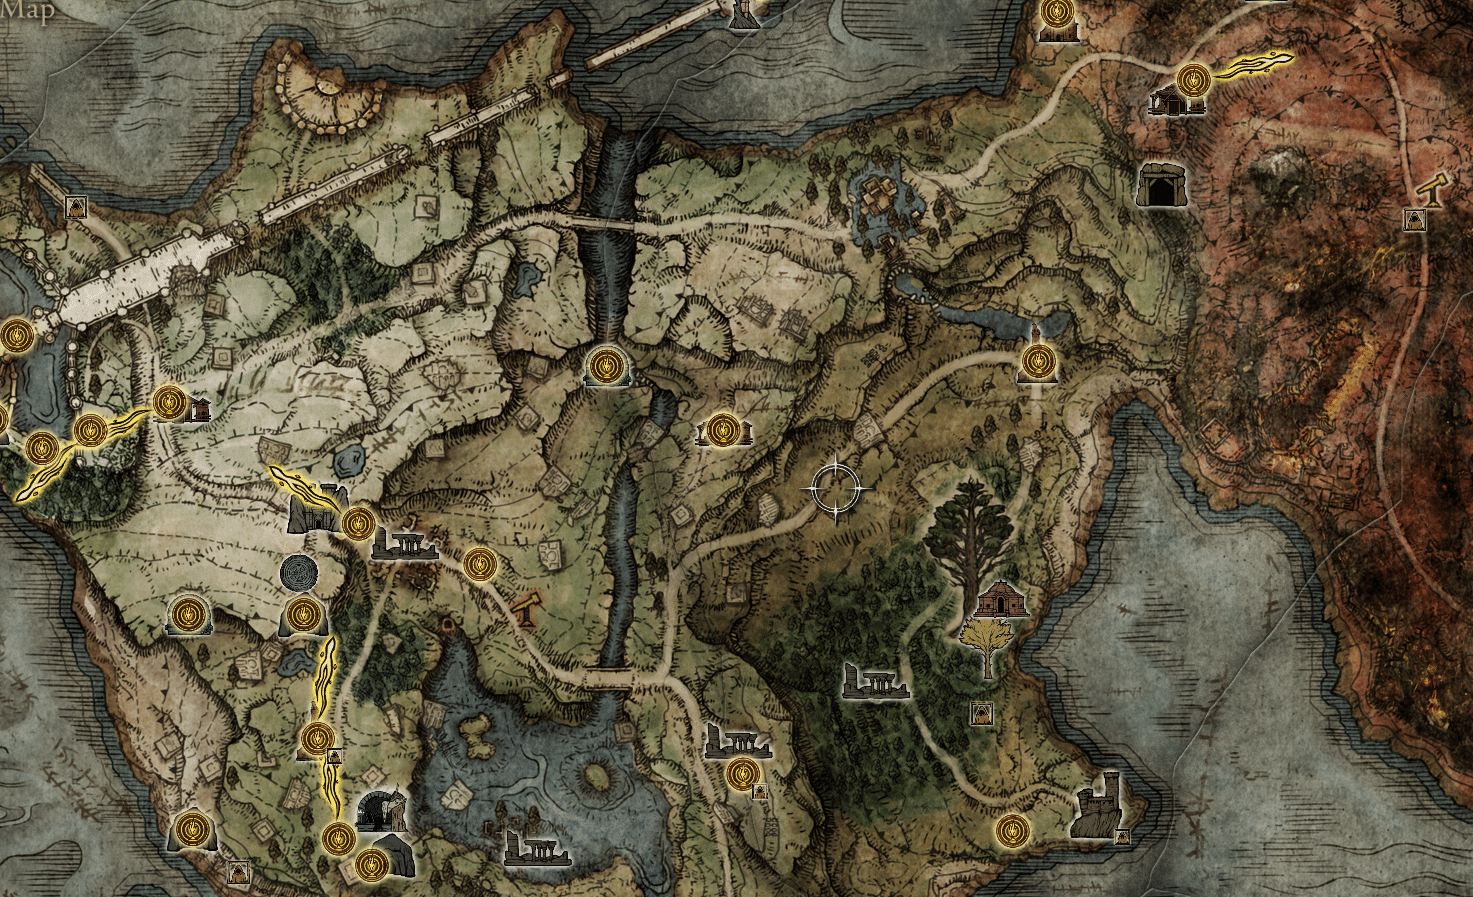 Cartographers Play Video Games - A Review of the Map in The Legend